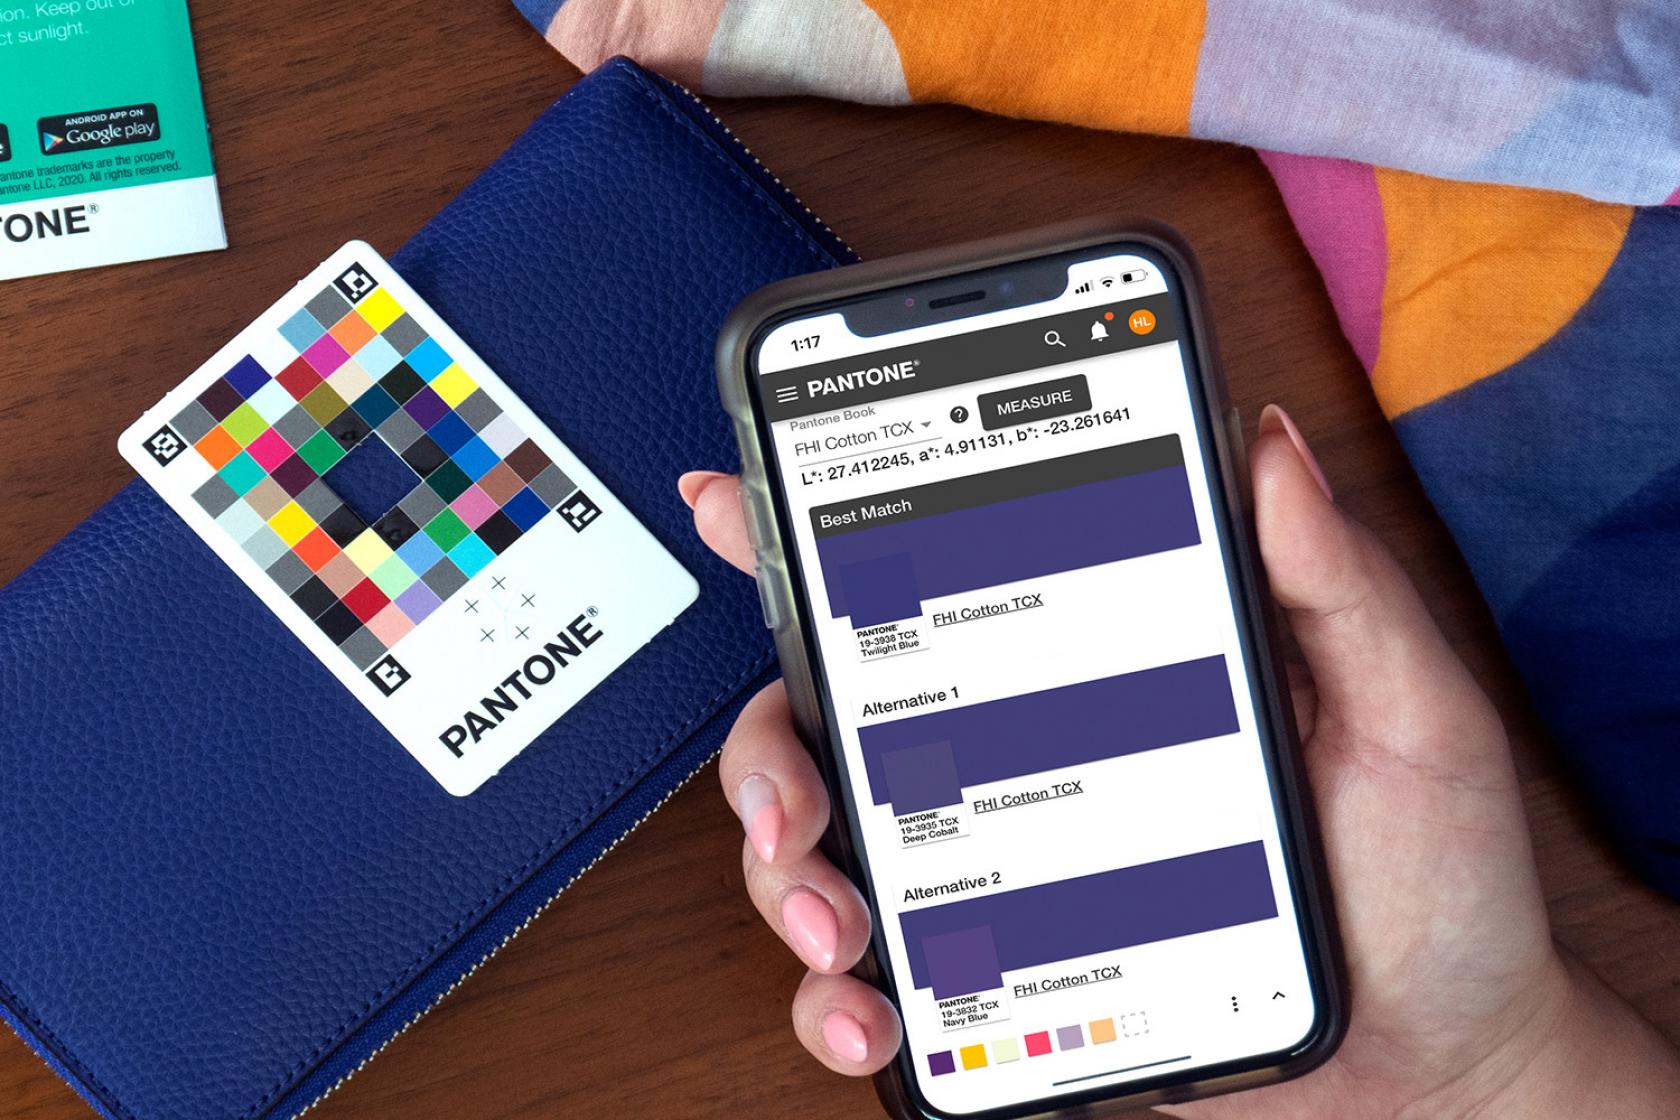 Pantone created an application to help us identify colors